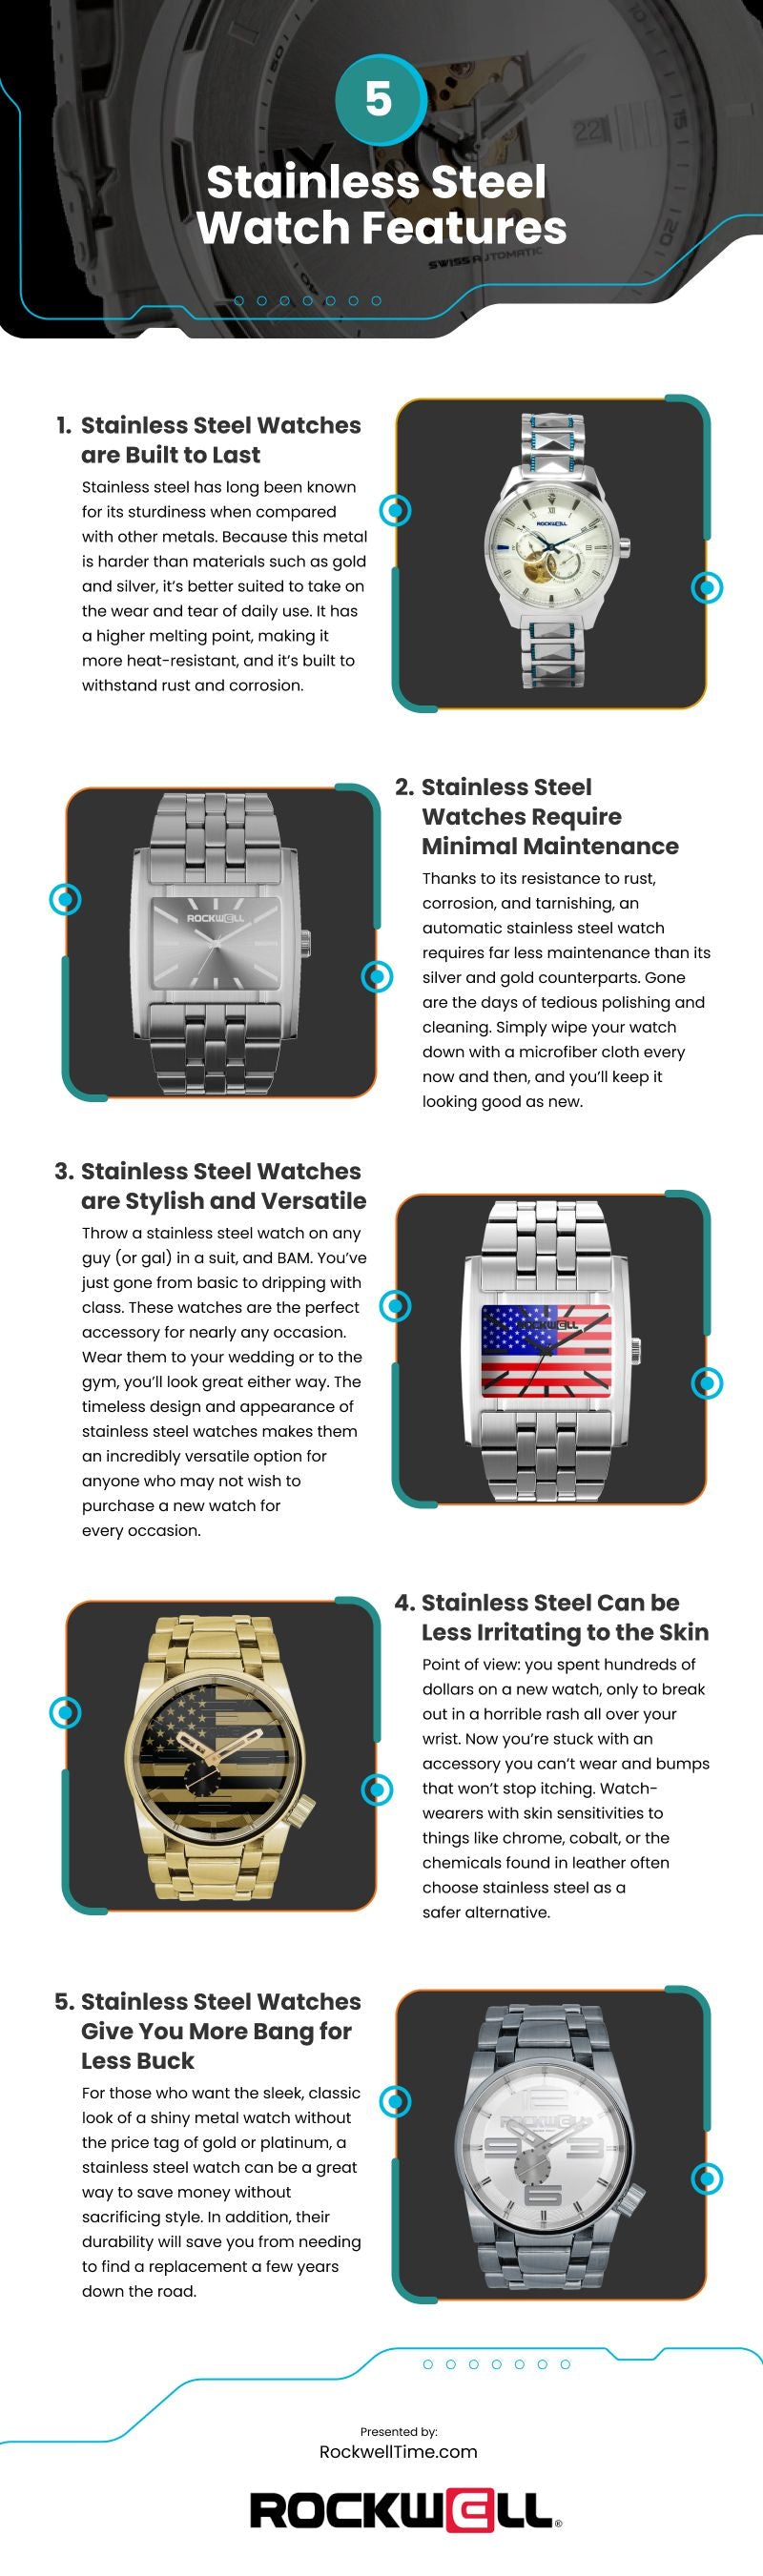 5 Stainless Steel Watch Features Infographic